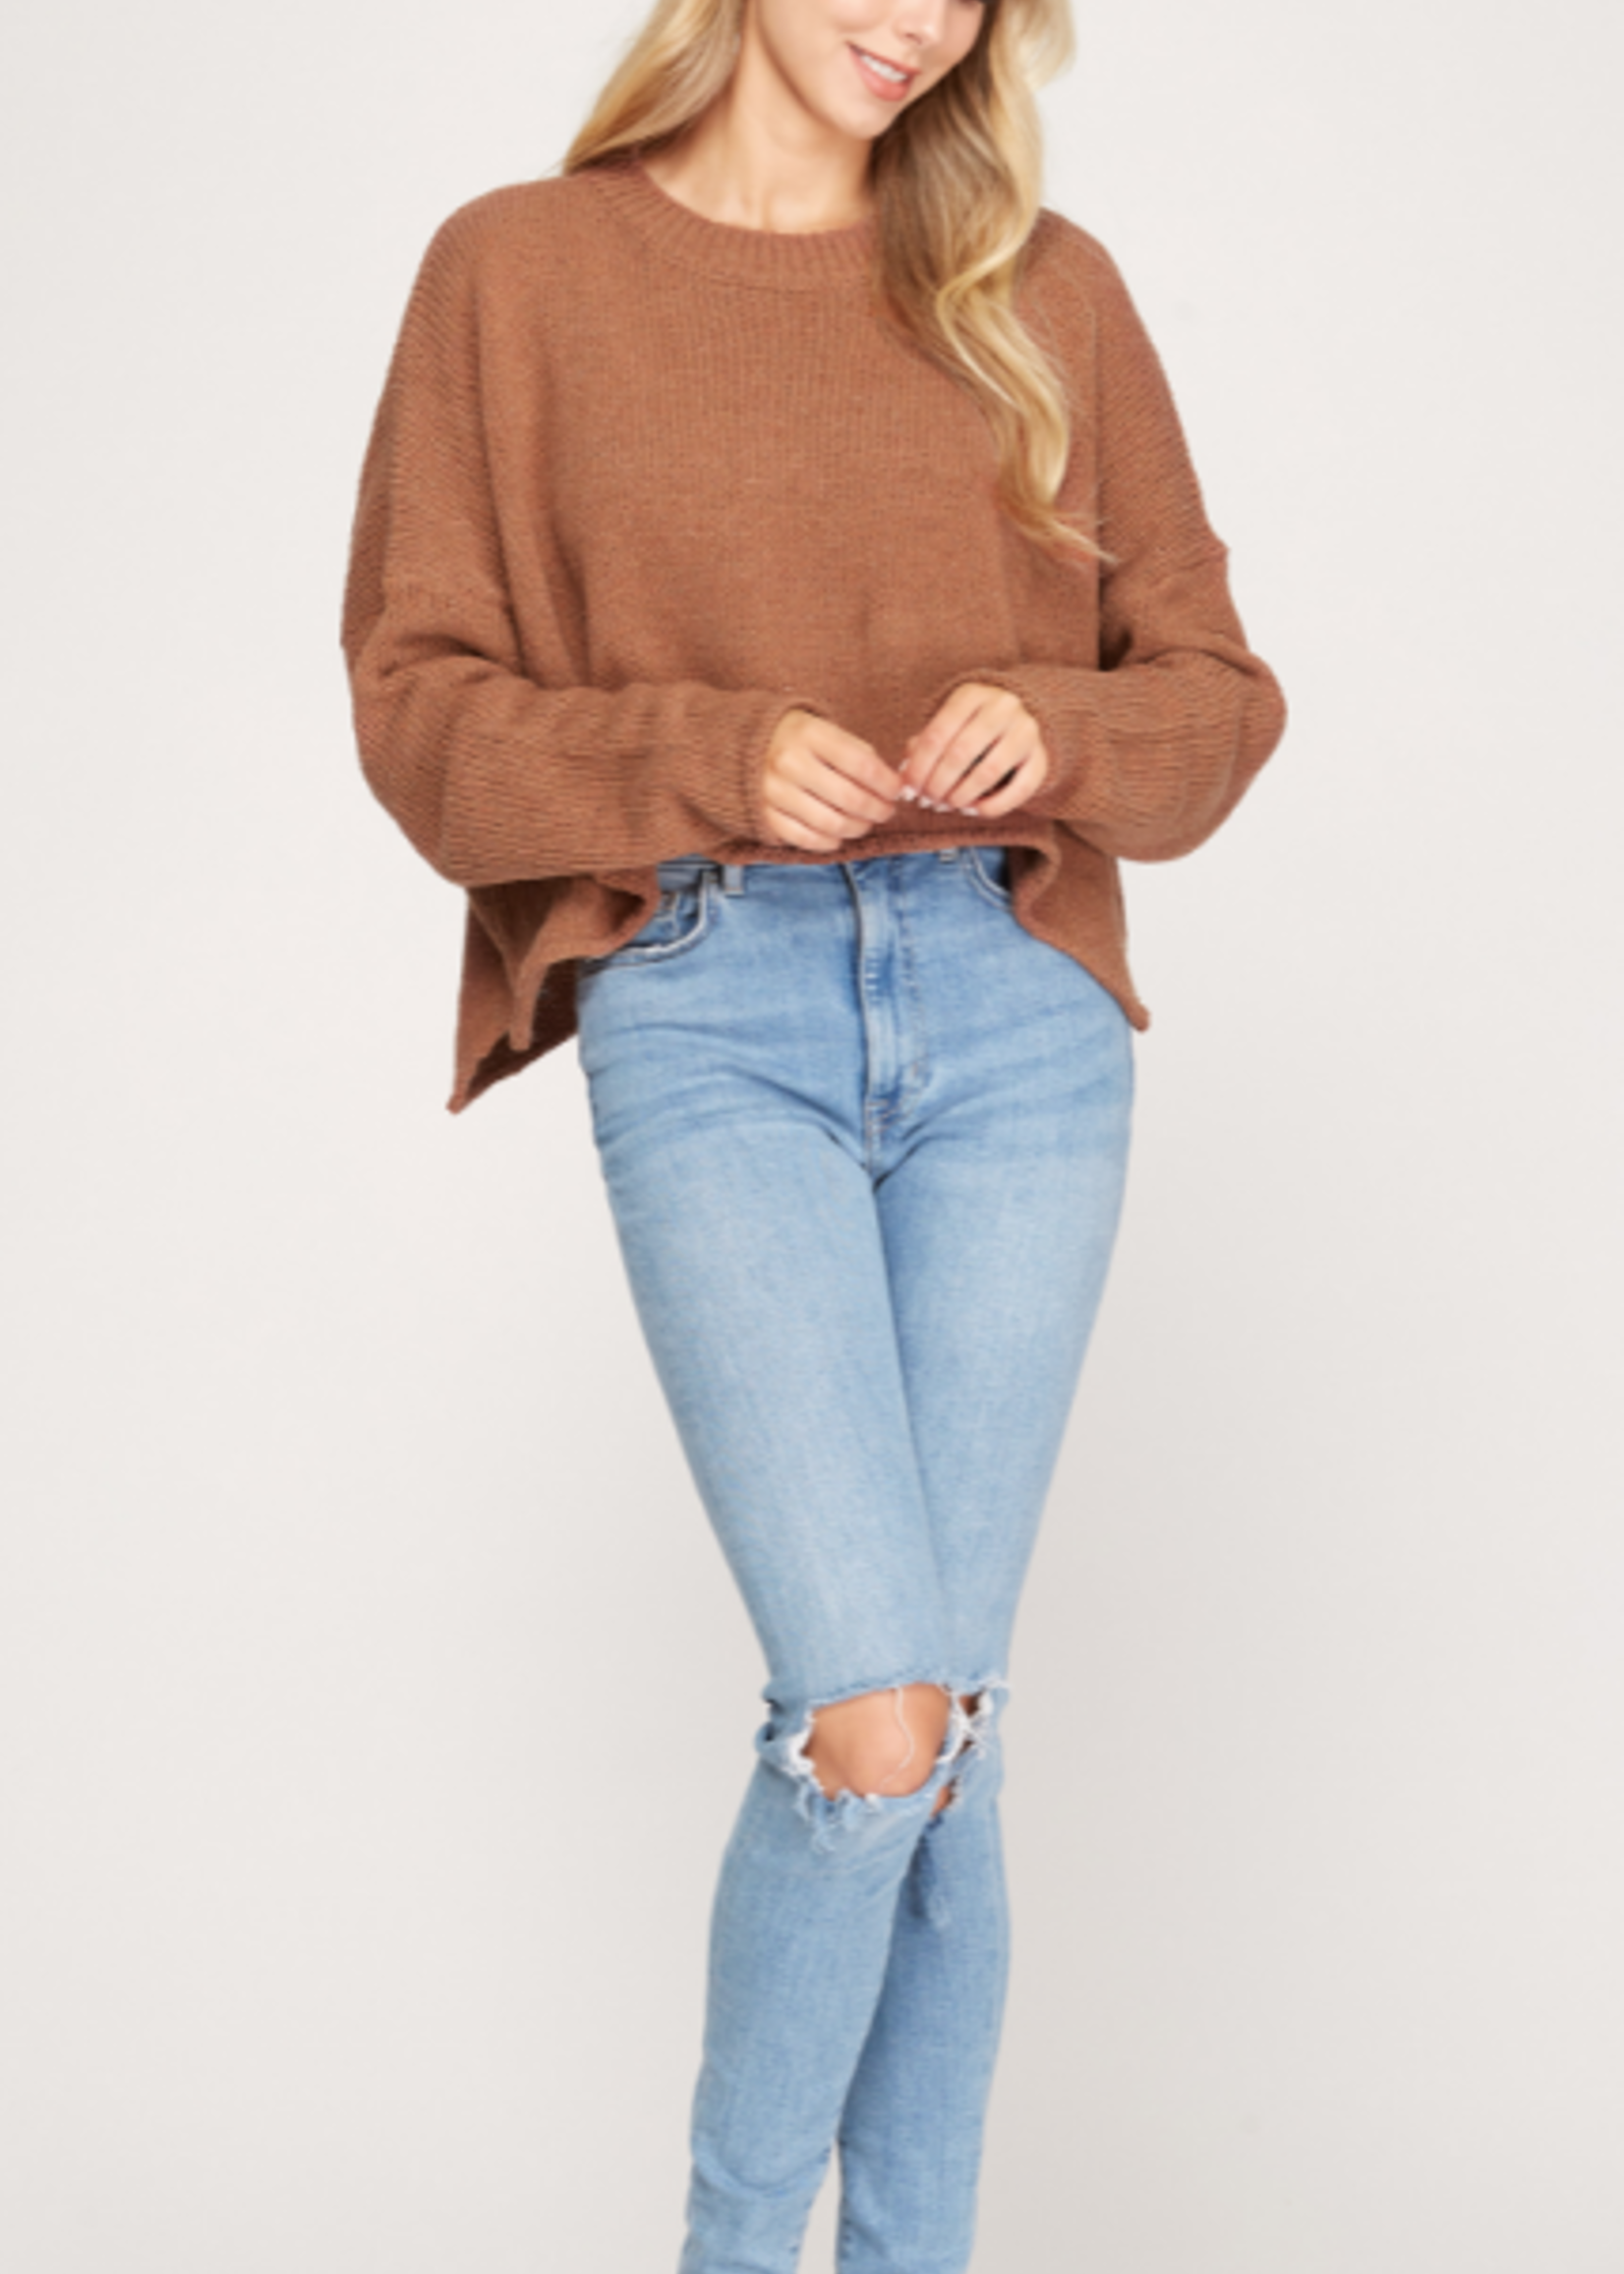 The Best Season Sweater (2 Colors)